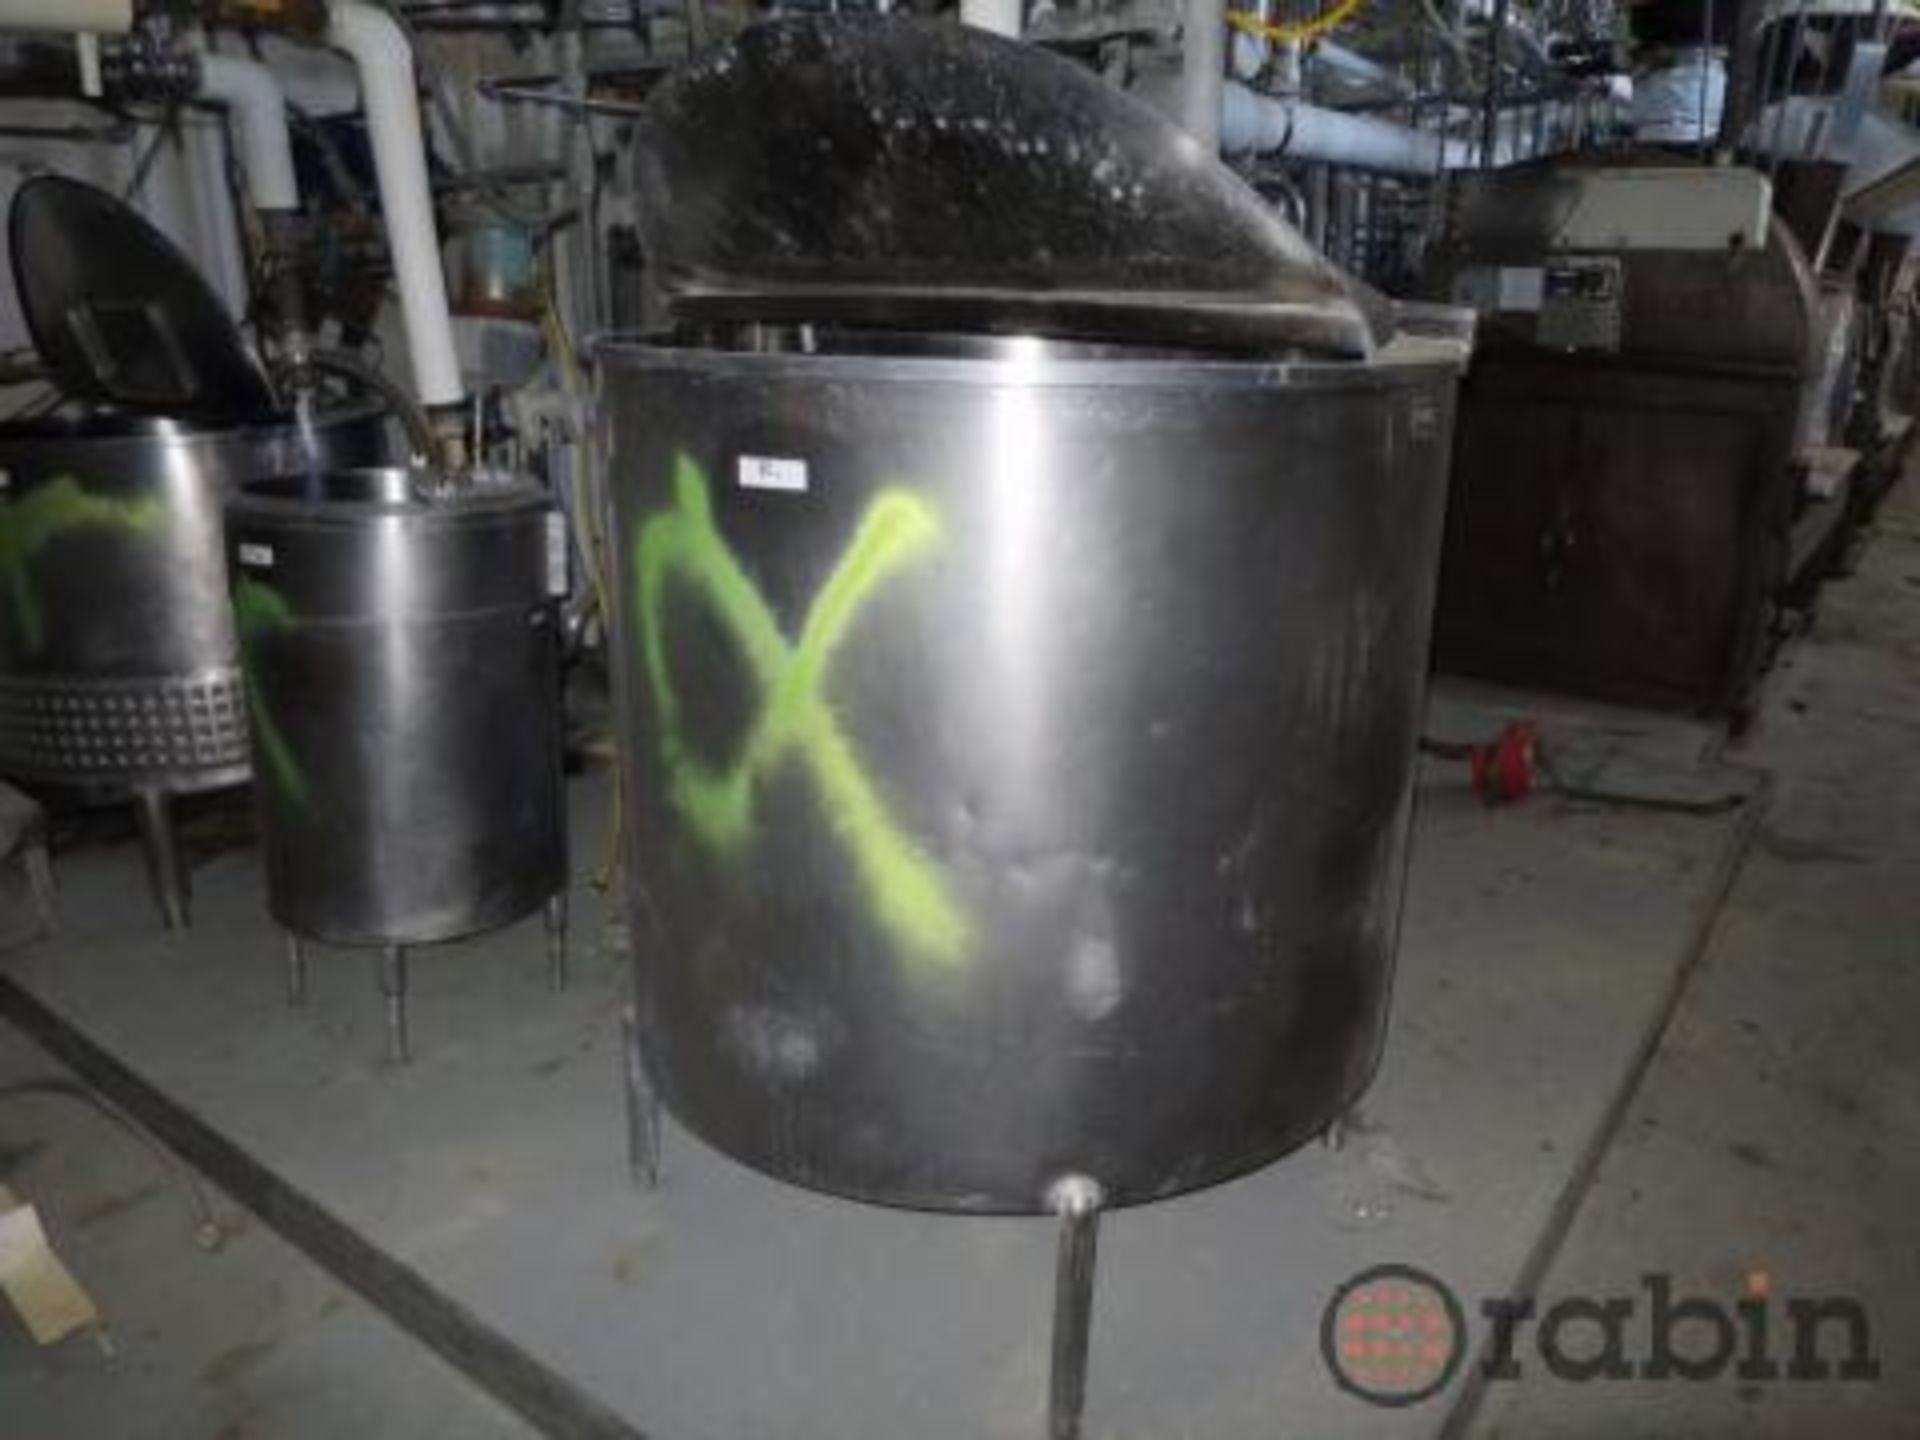 Stainless tank, approx 400 gal., 56" diameter x 46" high, single wall, SBO with connecting